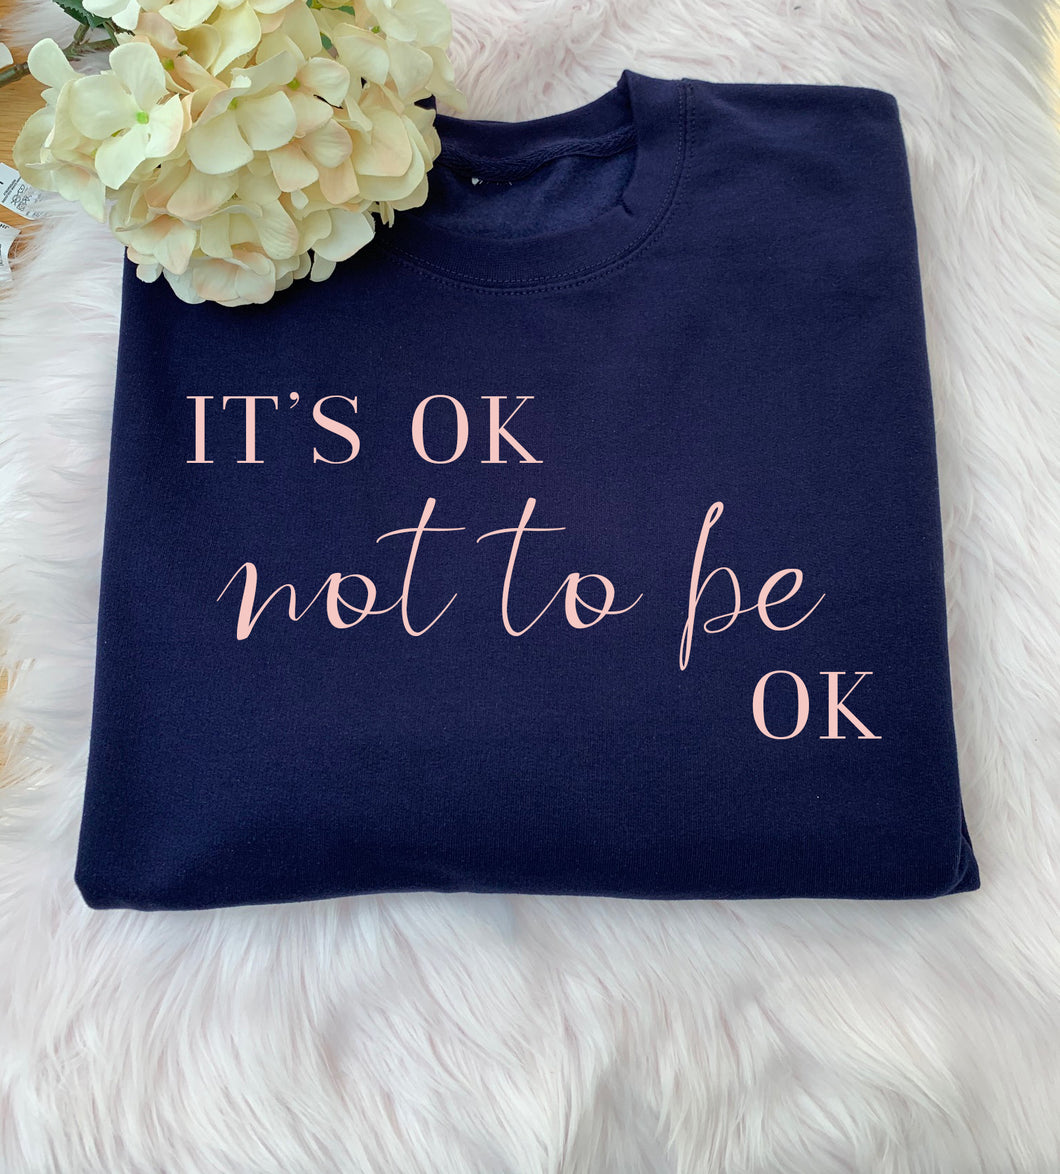 It's ok not to be ok - Jumper